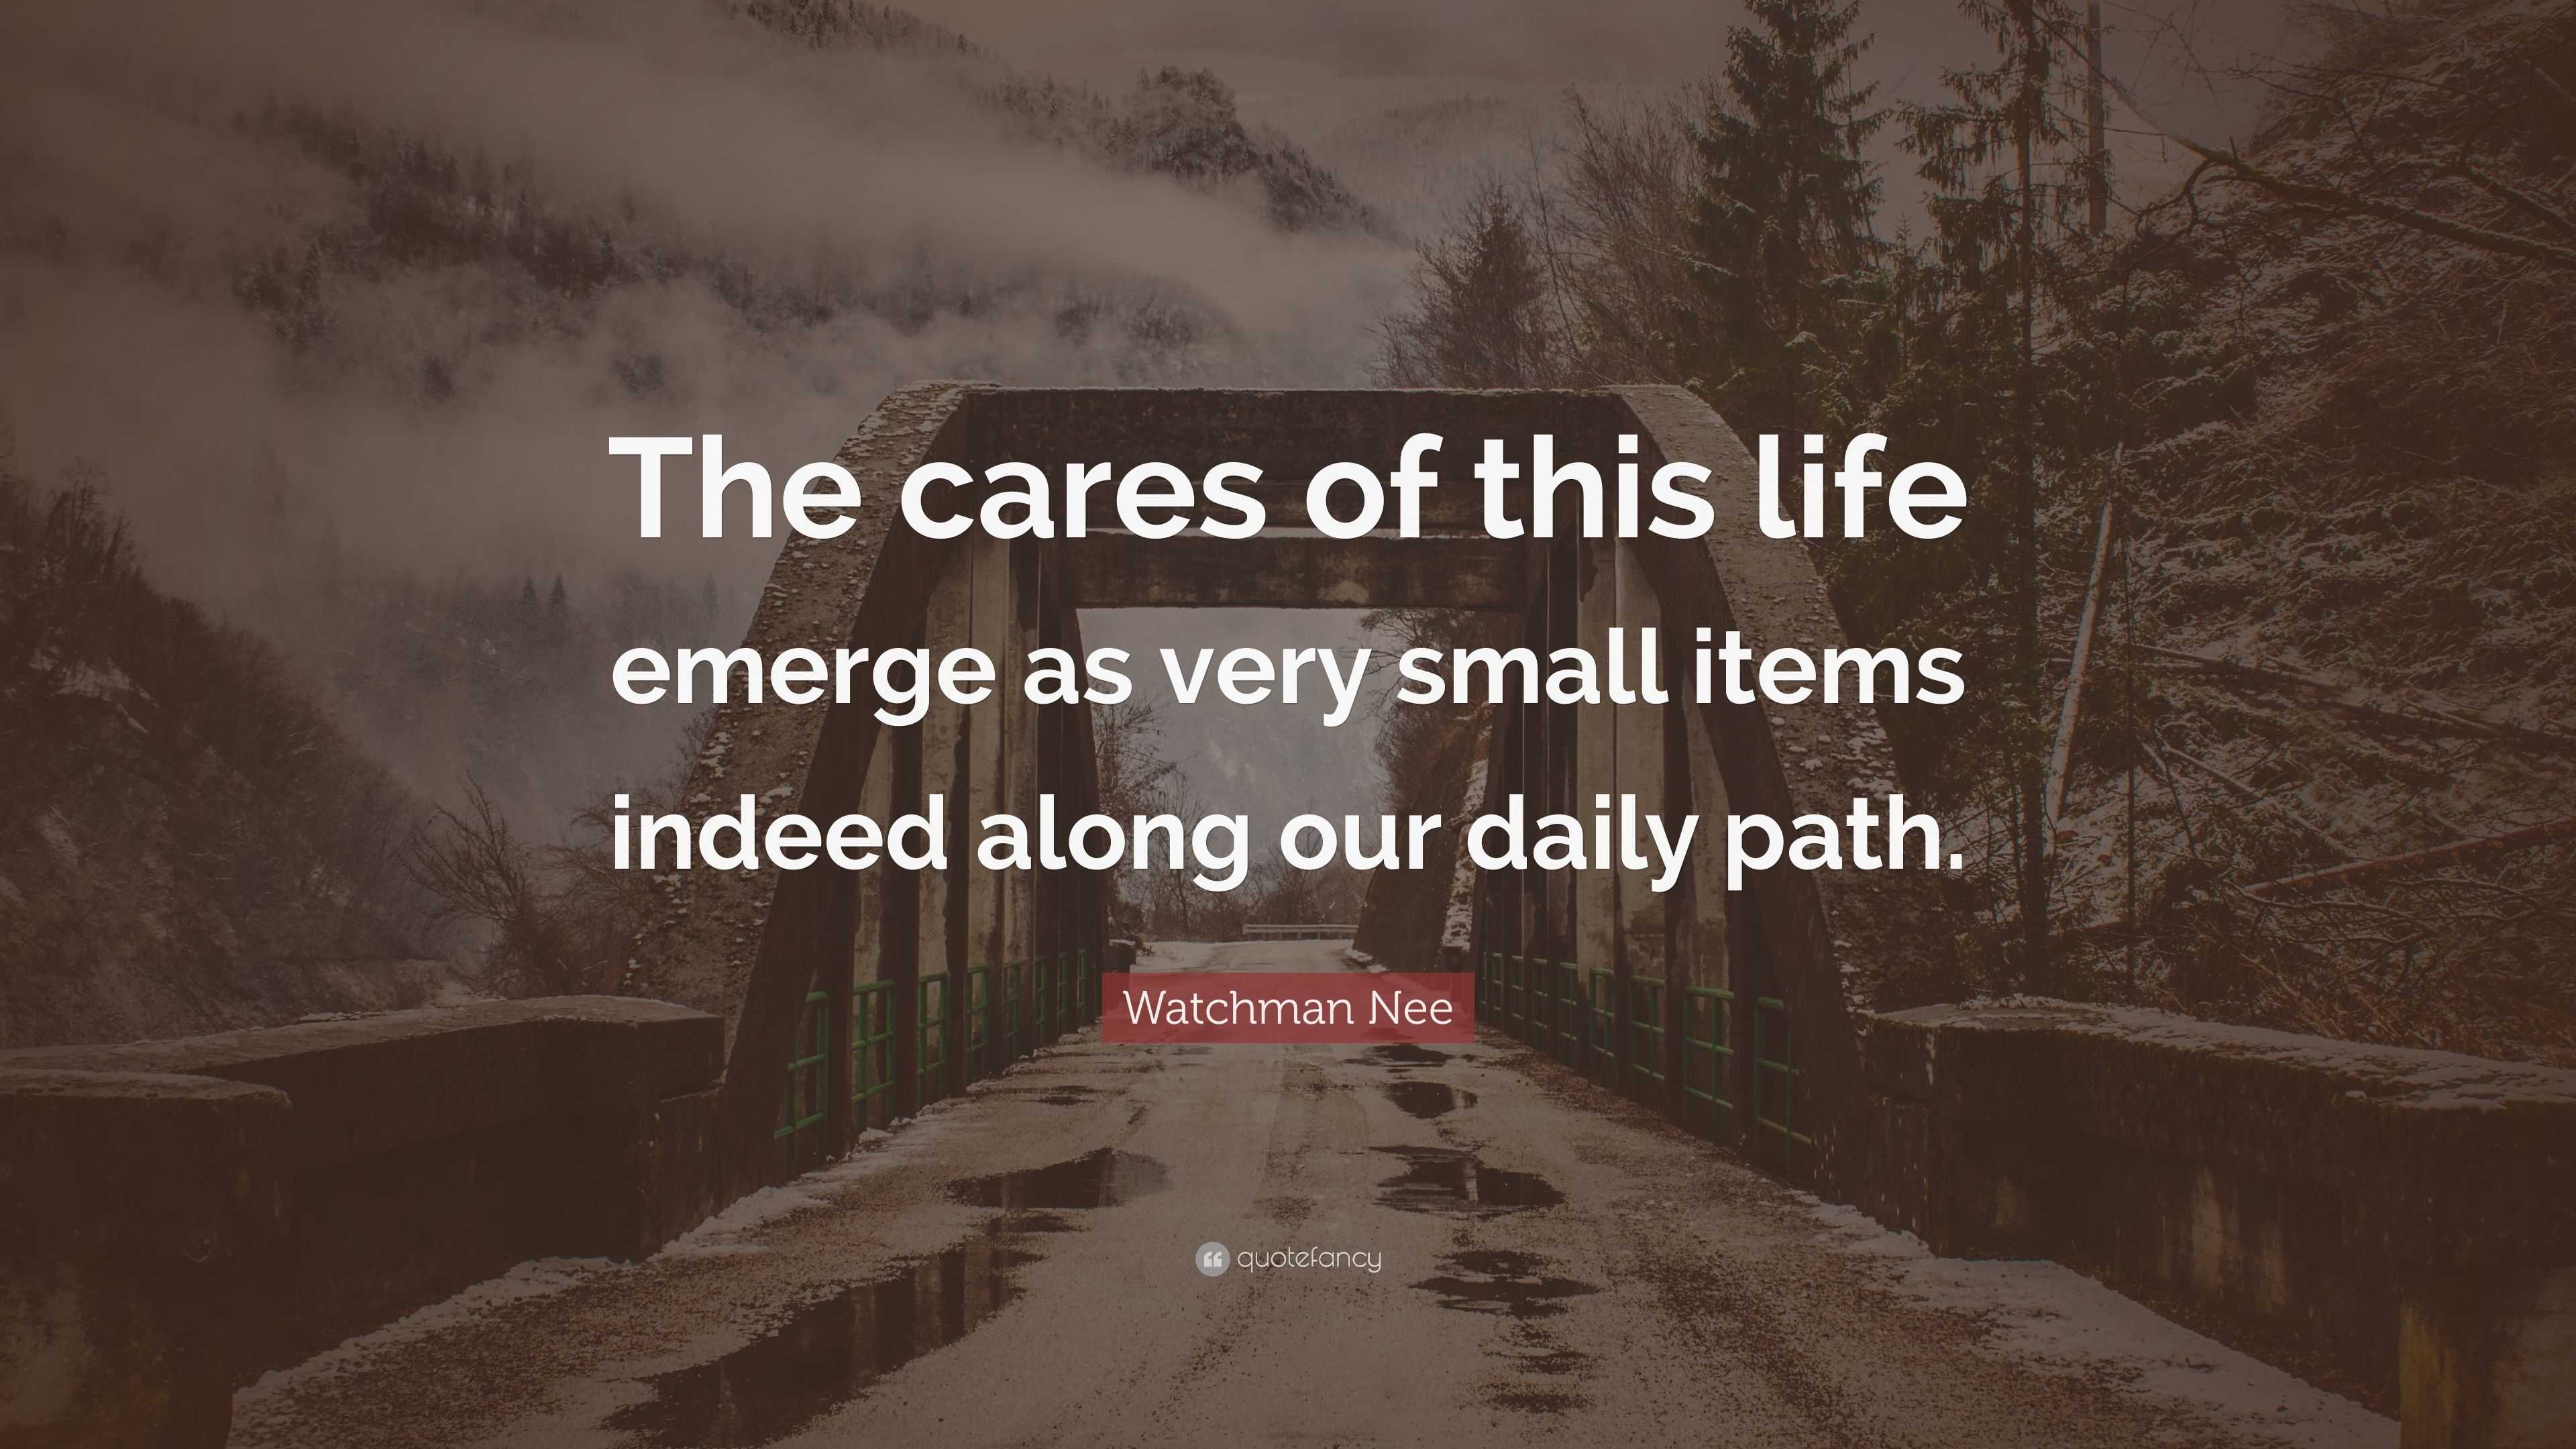 Watchman Nee Quote: “The cares of this life emerge as very small items ...